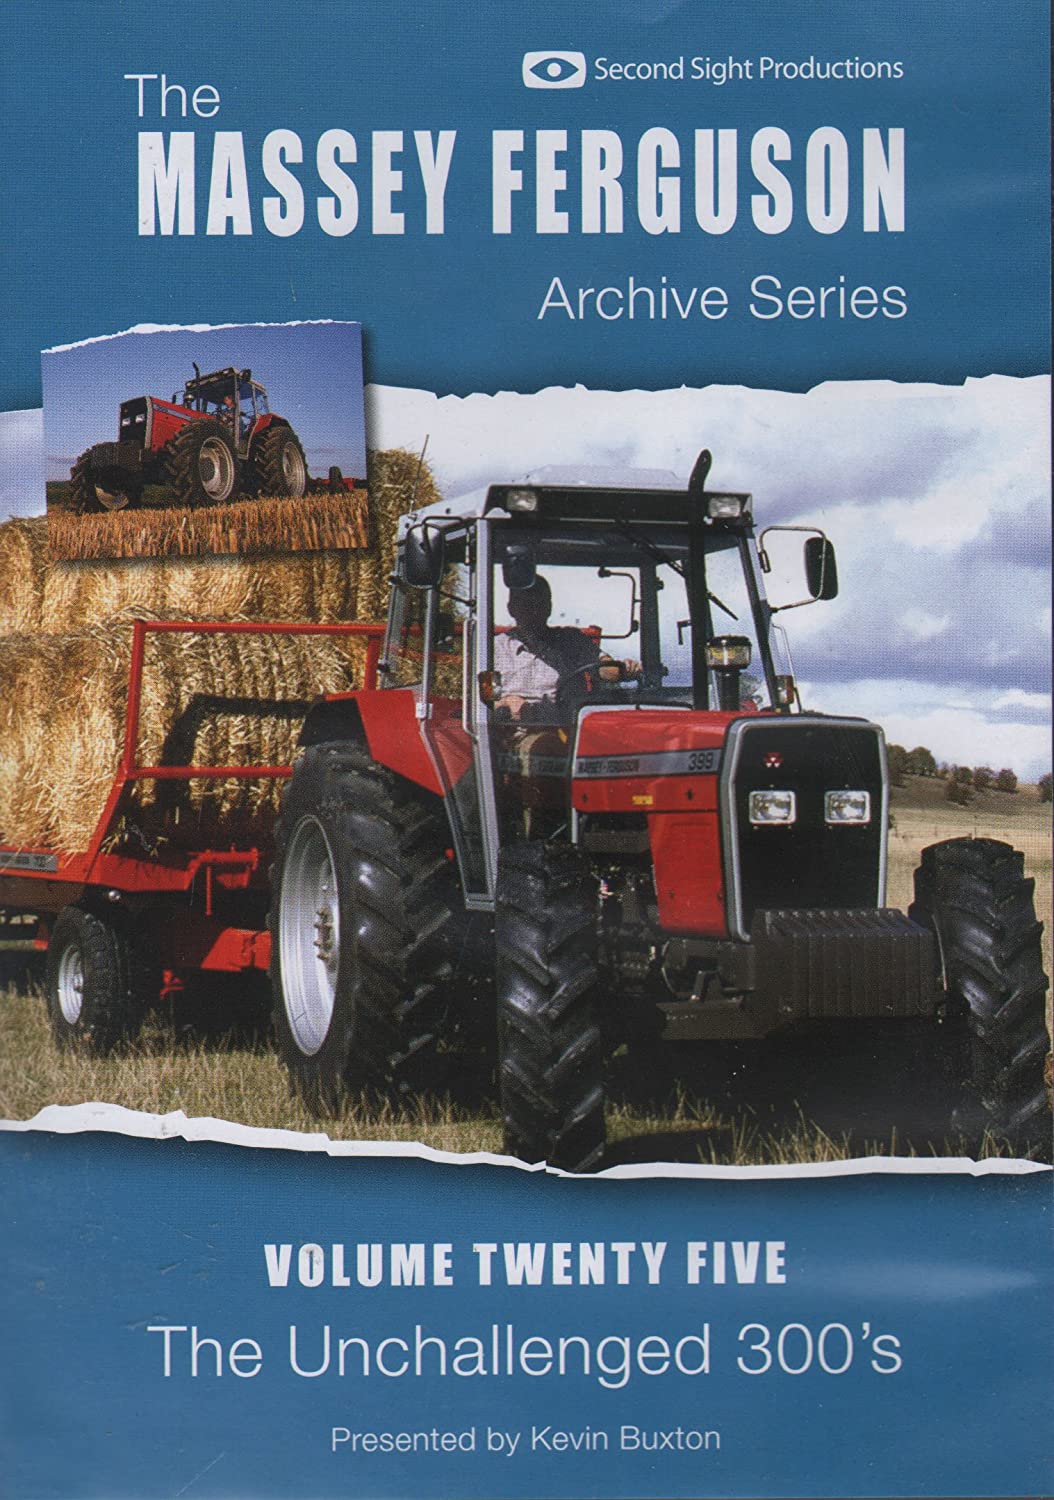 The Massey Ferguson Archive Series - Volume 25 The Unchallenged 300's